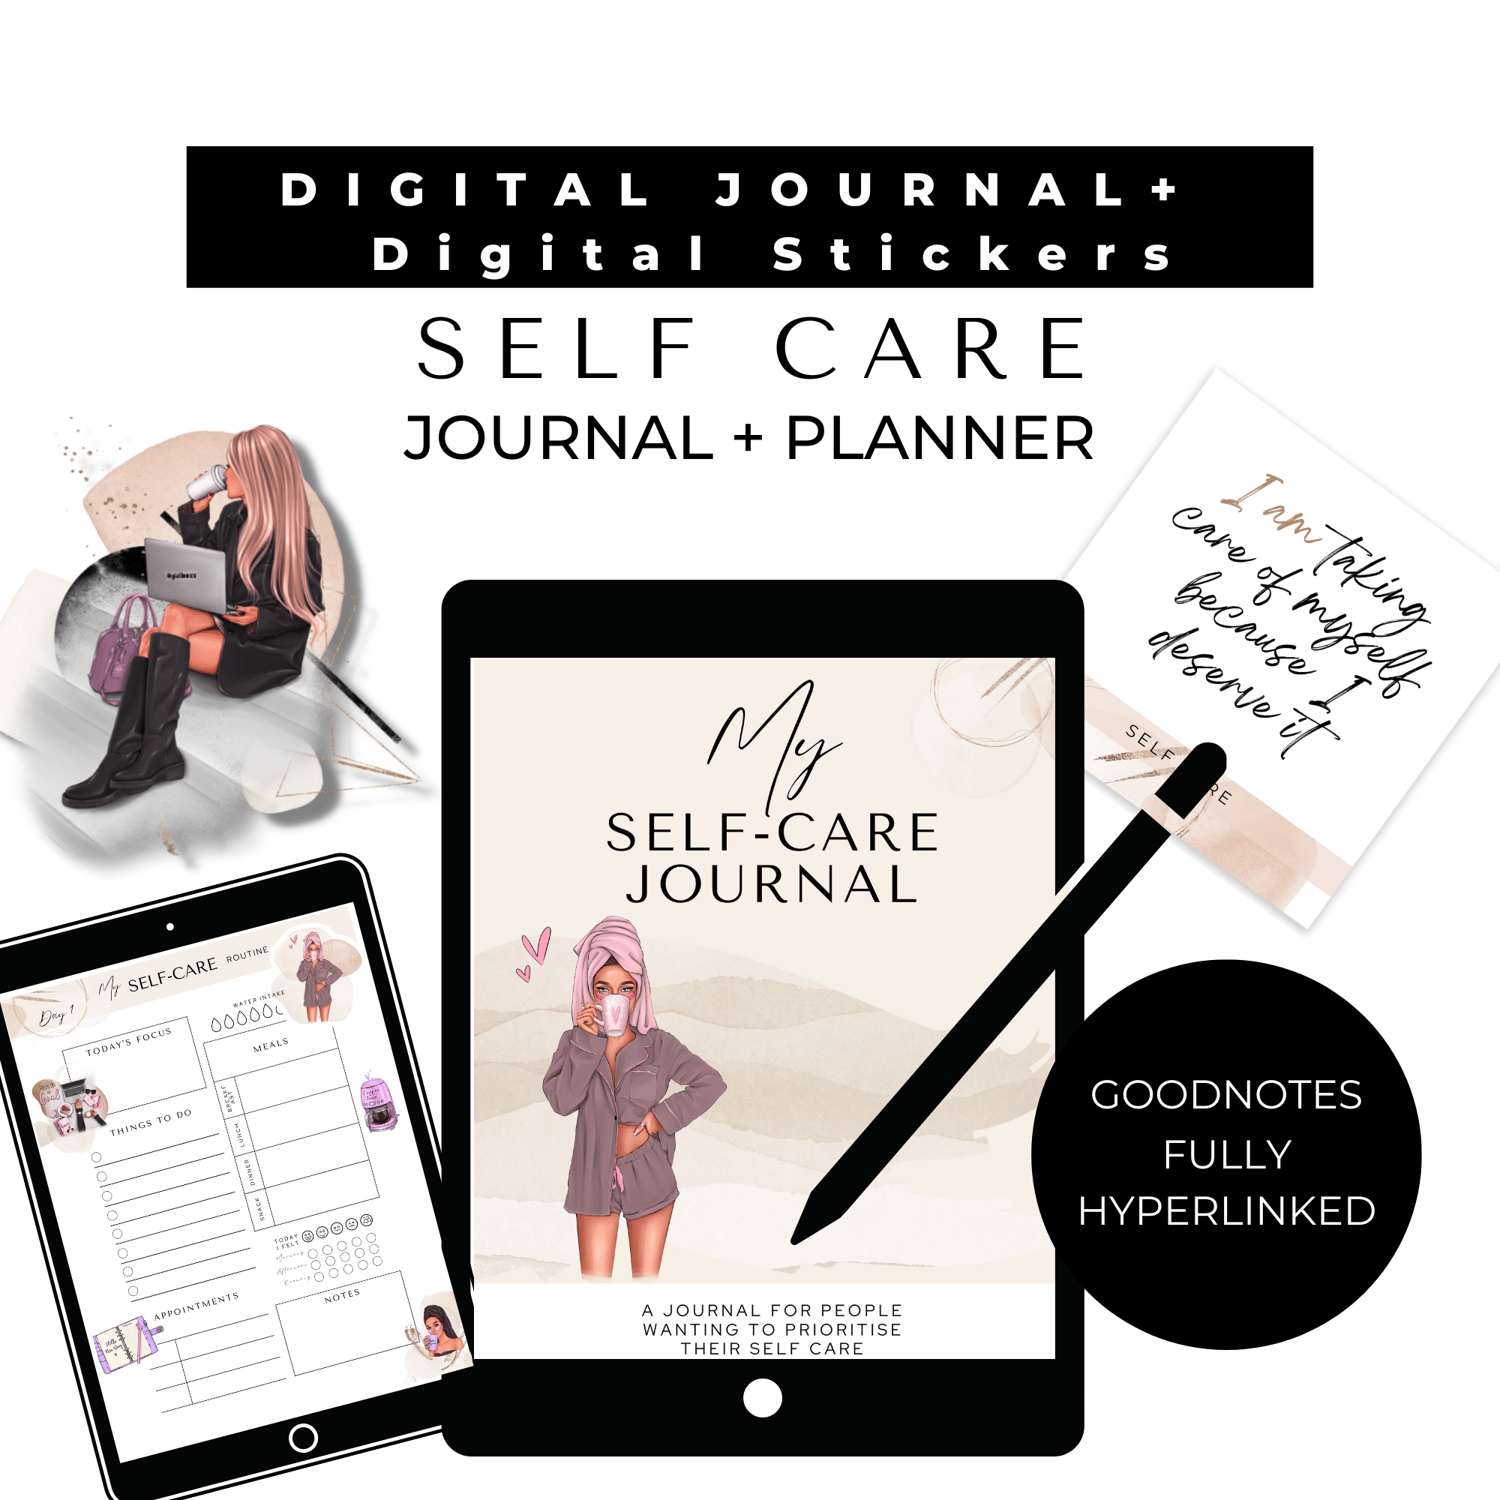 The spiritual self-care journal: healing journal prompts, positive  affirmations journaling, what to put in a self-care journal, self-help  journal